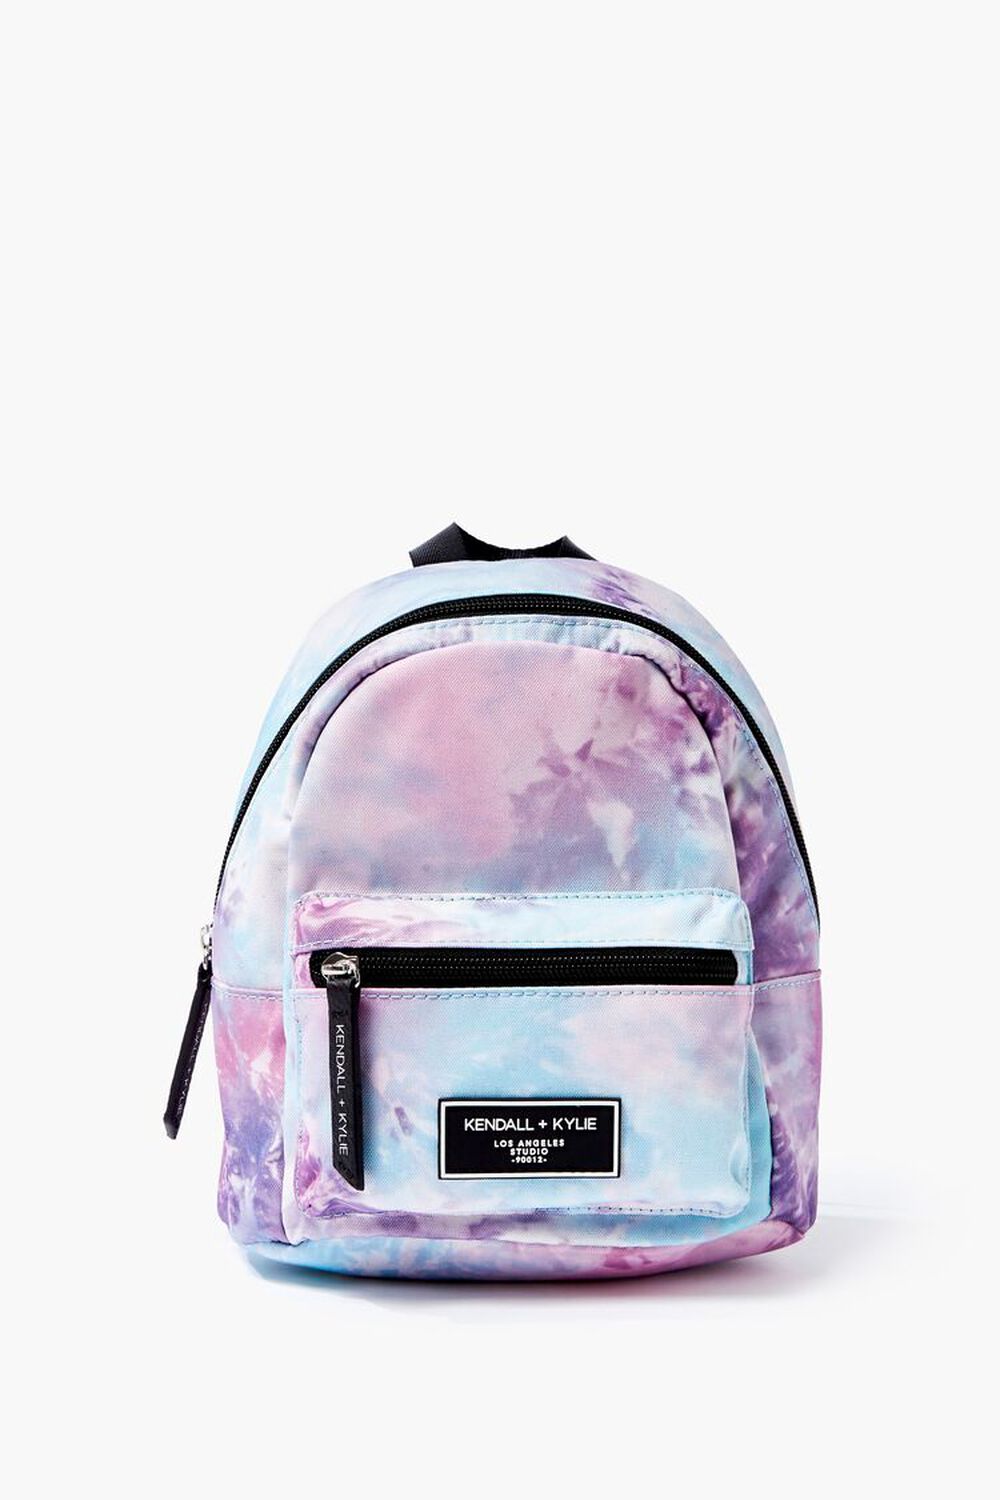 KENDALL + KYLIE Micro Floral Mini Backpack